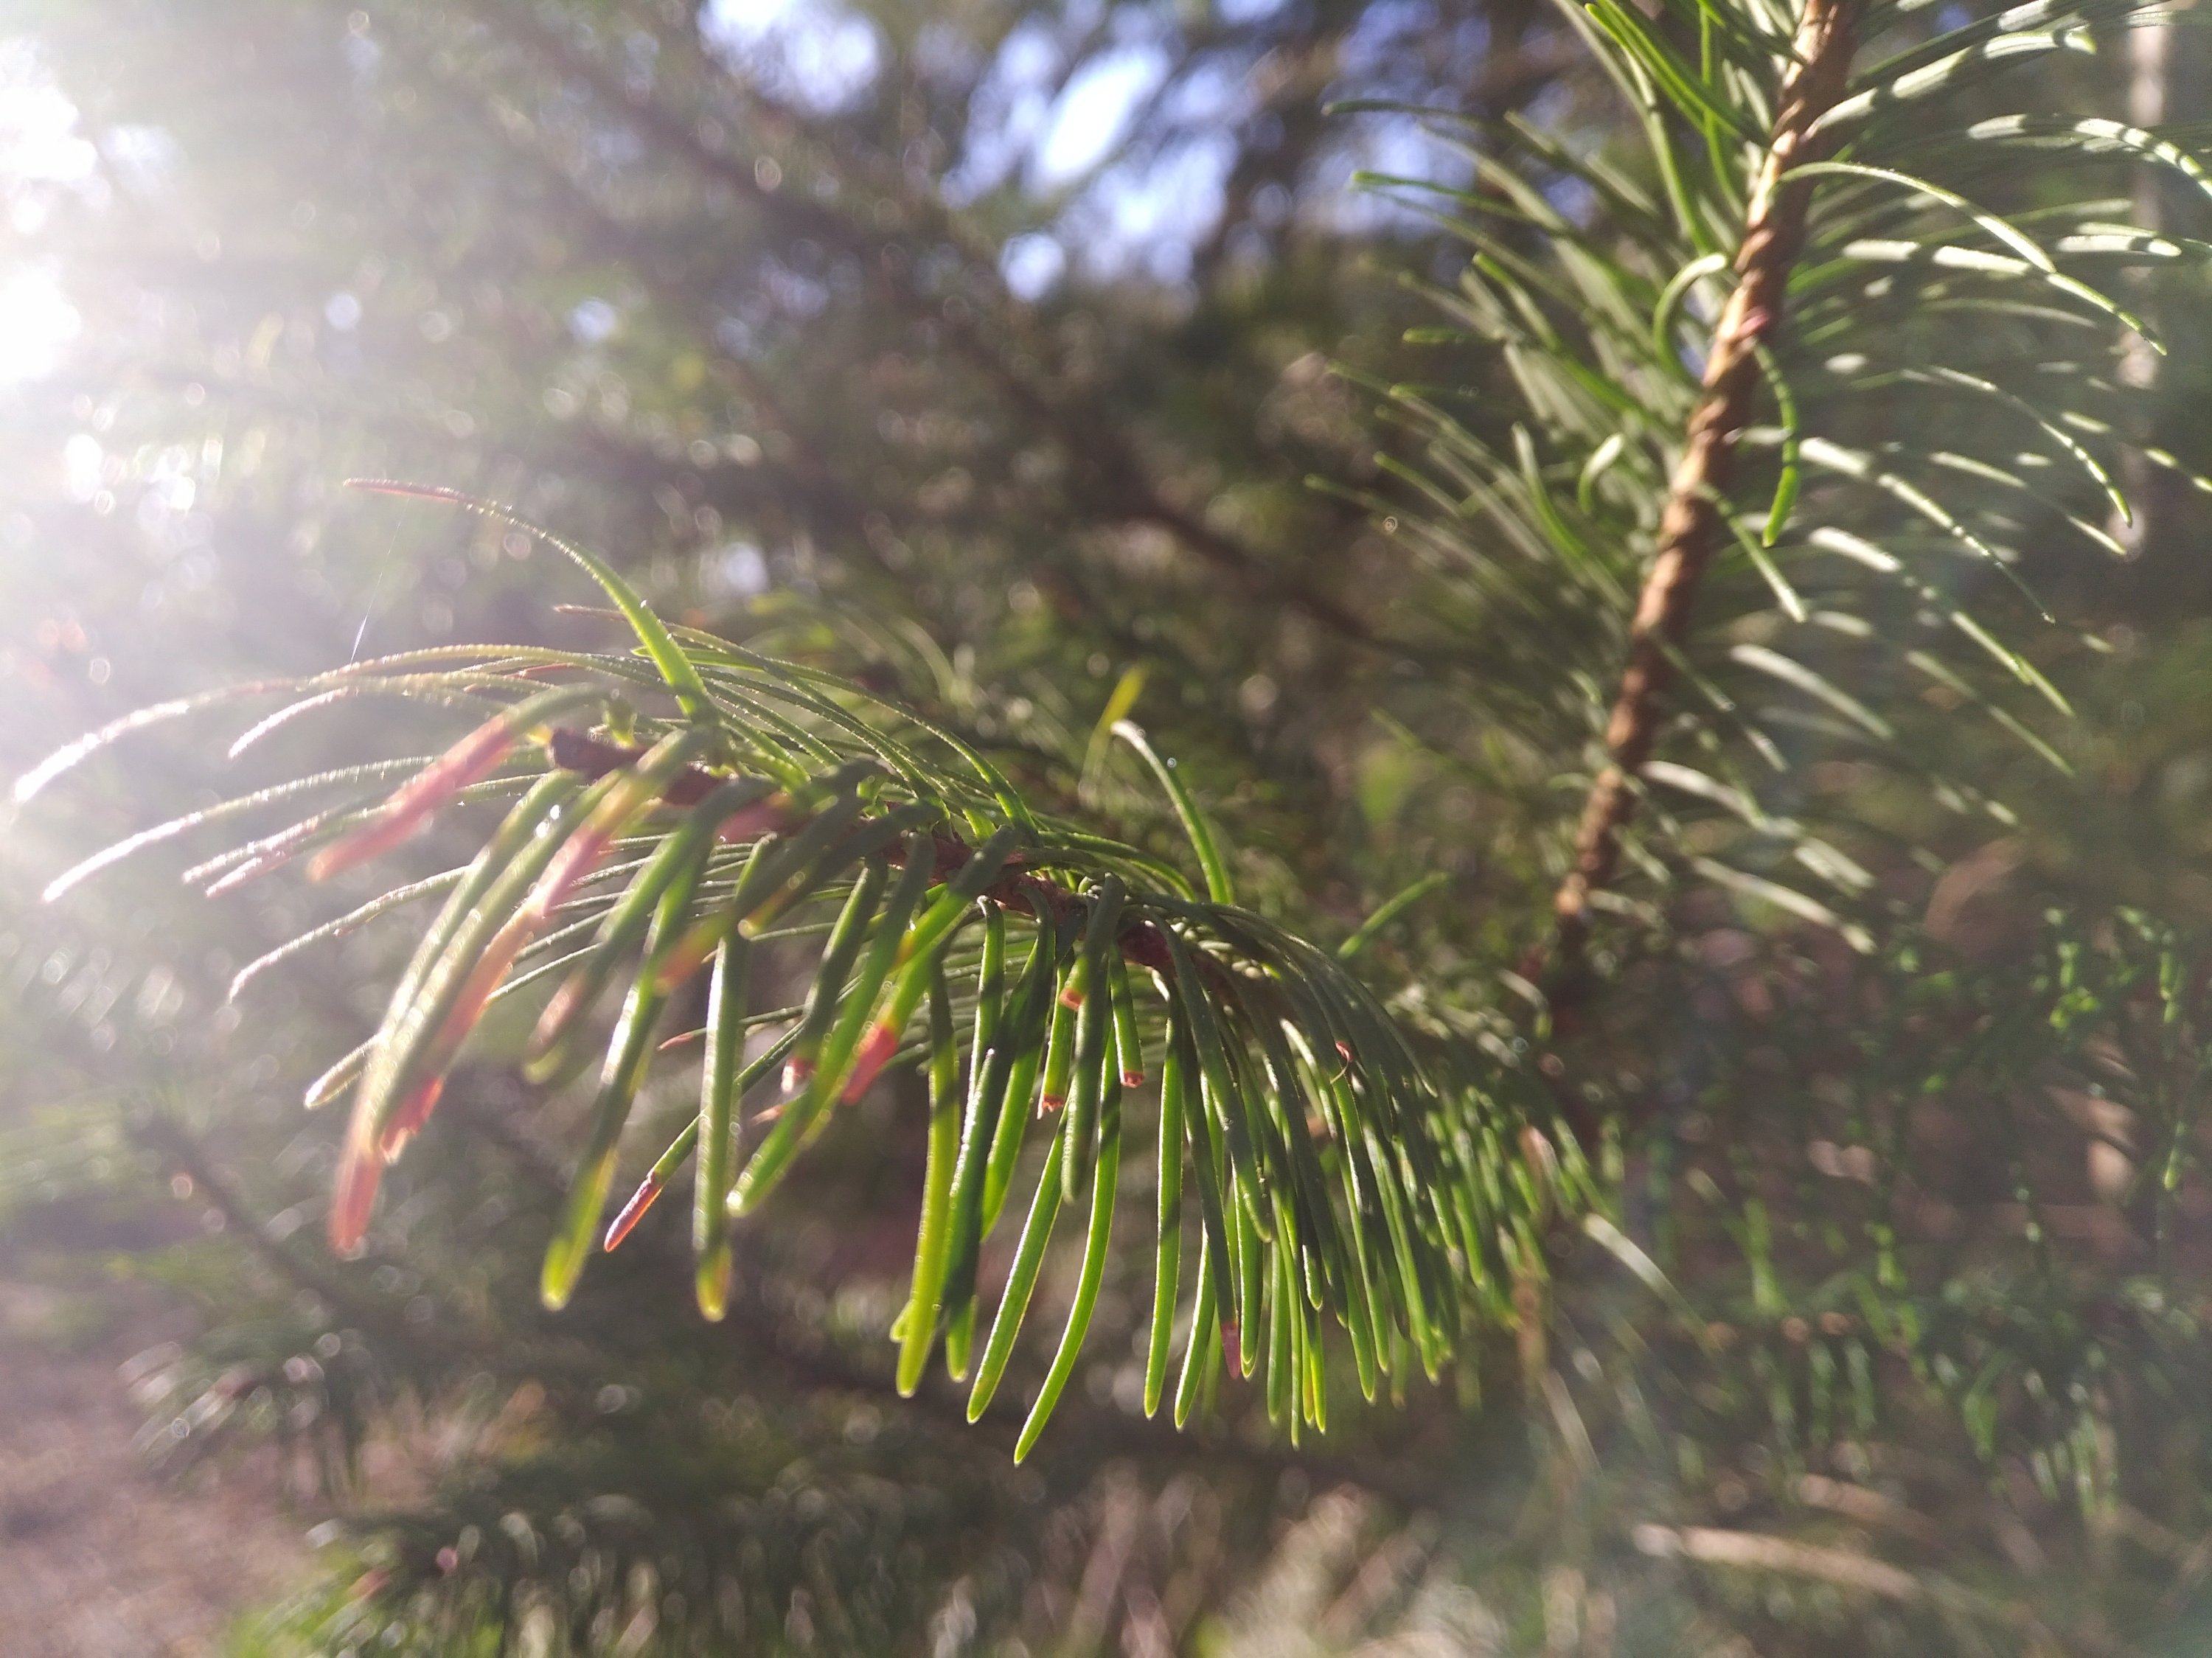 A close-up of two branch tips of an evergreen, with green needles sprouting from them. Sunlight comes in at a shallow angle from the left, creating a slight flare at the left of the frame.